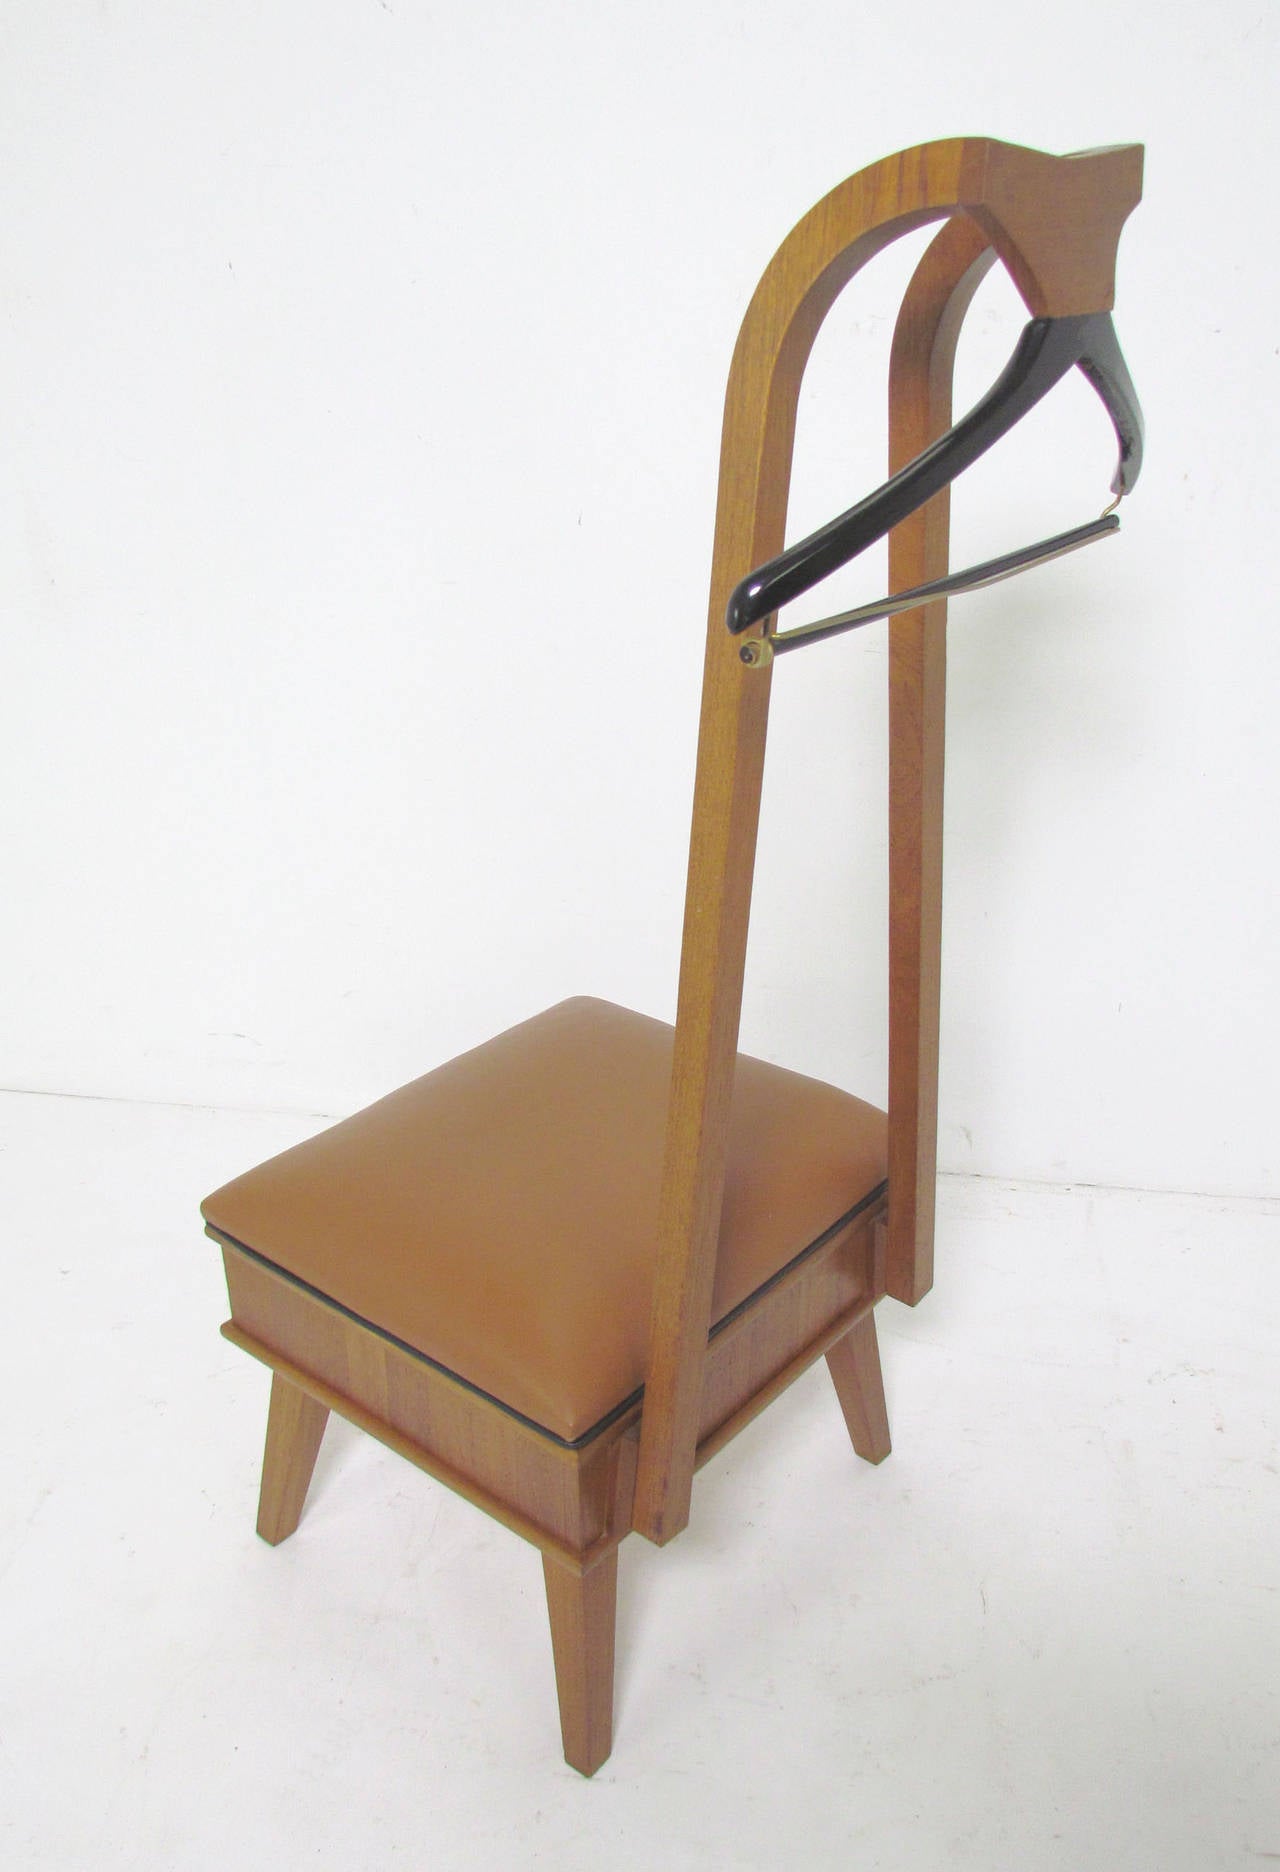 American Mid-Century Modern Studio Made Valet Chair in Walnut and Leather